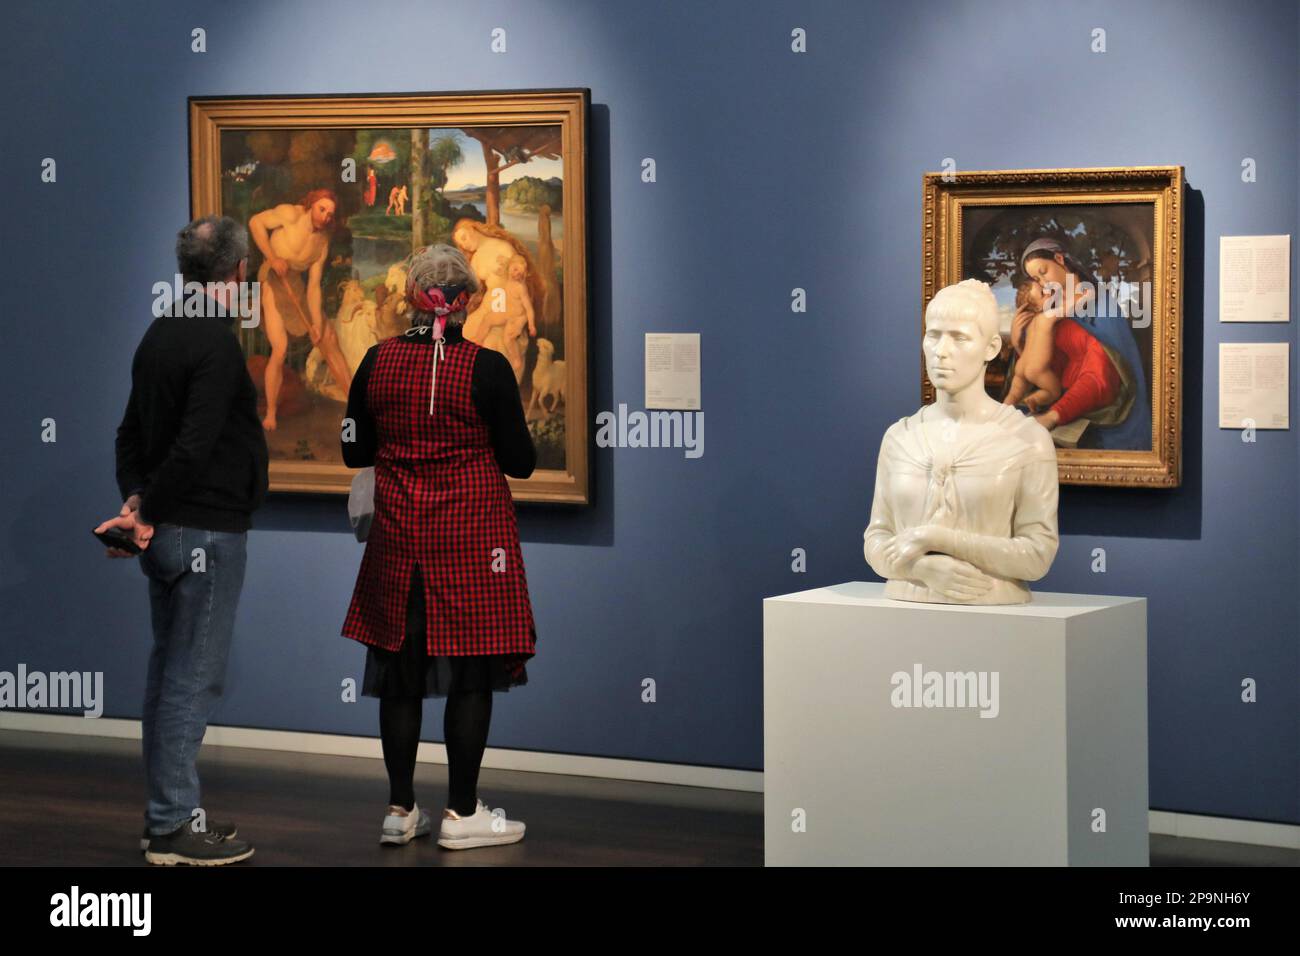 Visitors studying paintings at the Wallraf-Richartz Museum, Cologne, Germany Stock Photo